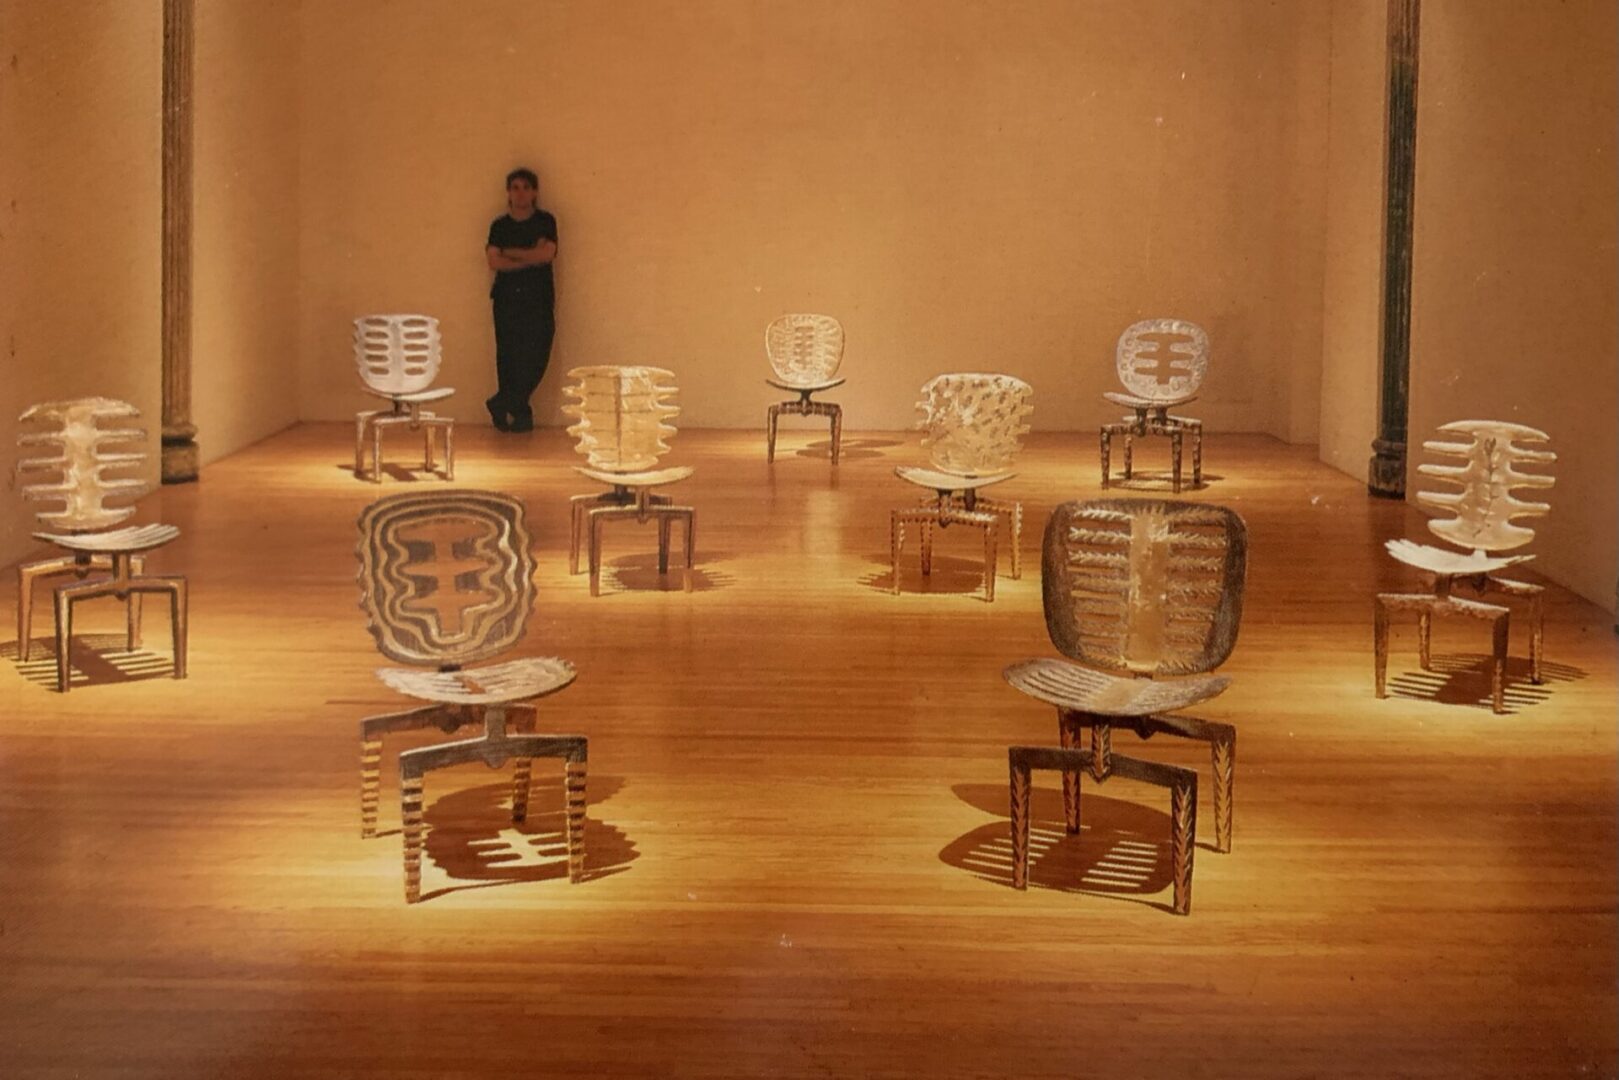 A person standing in front of many chairs on the floor.